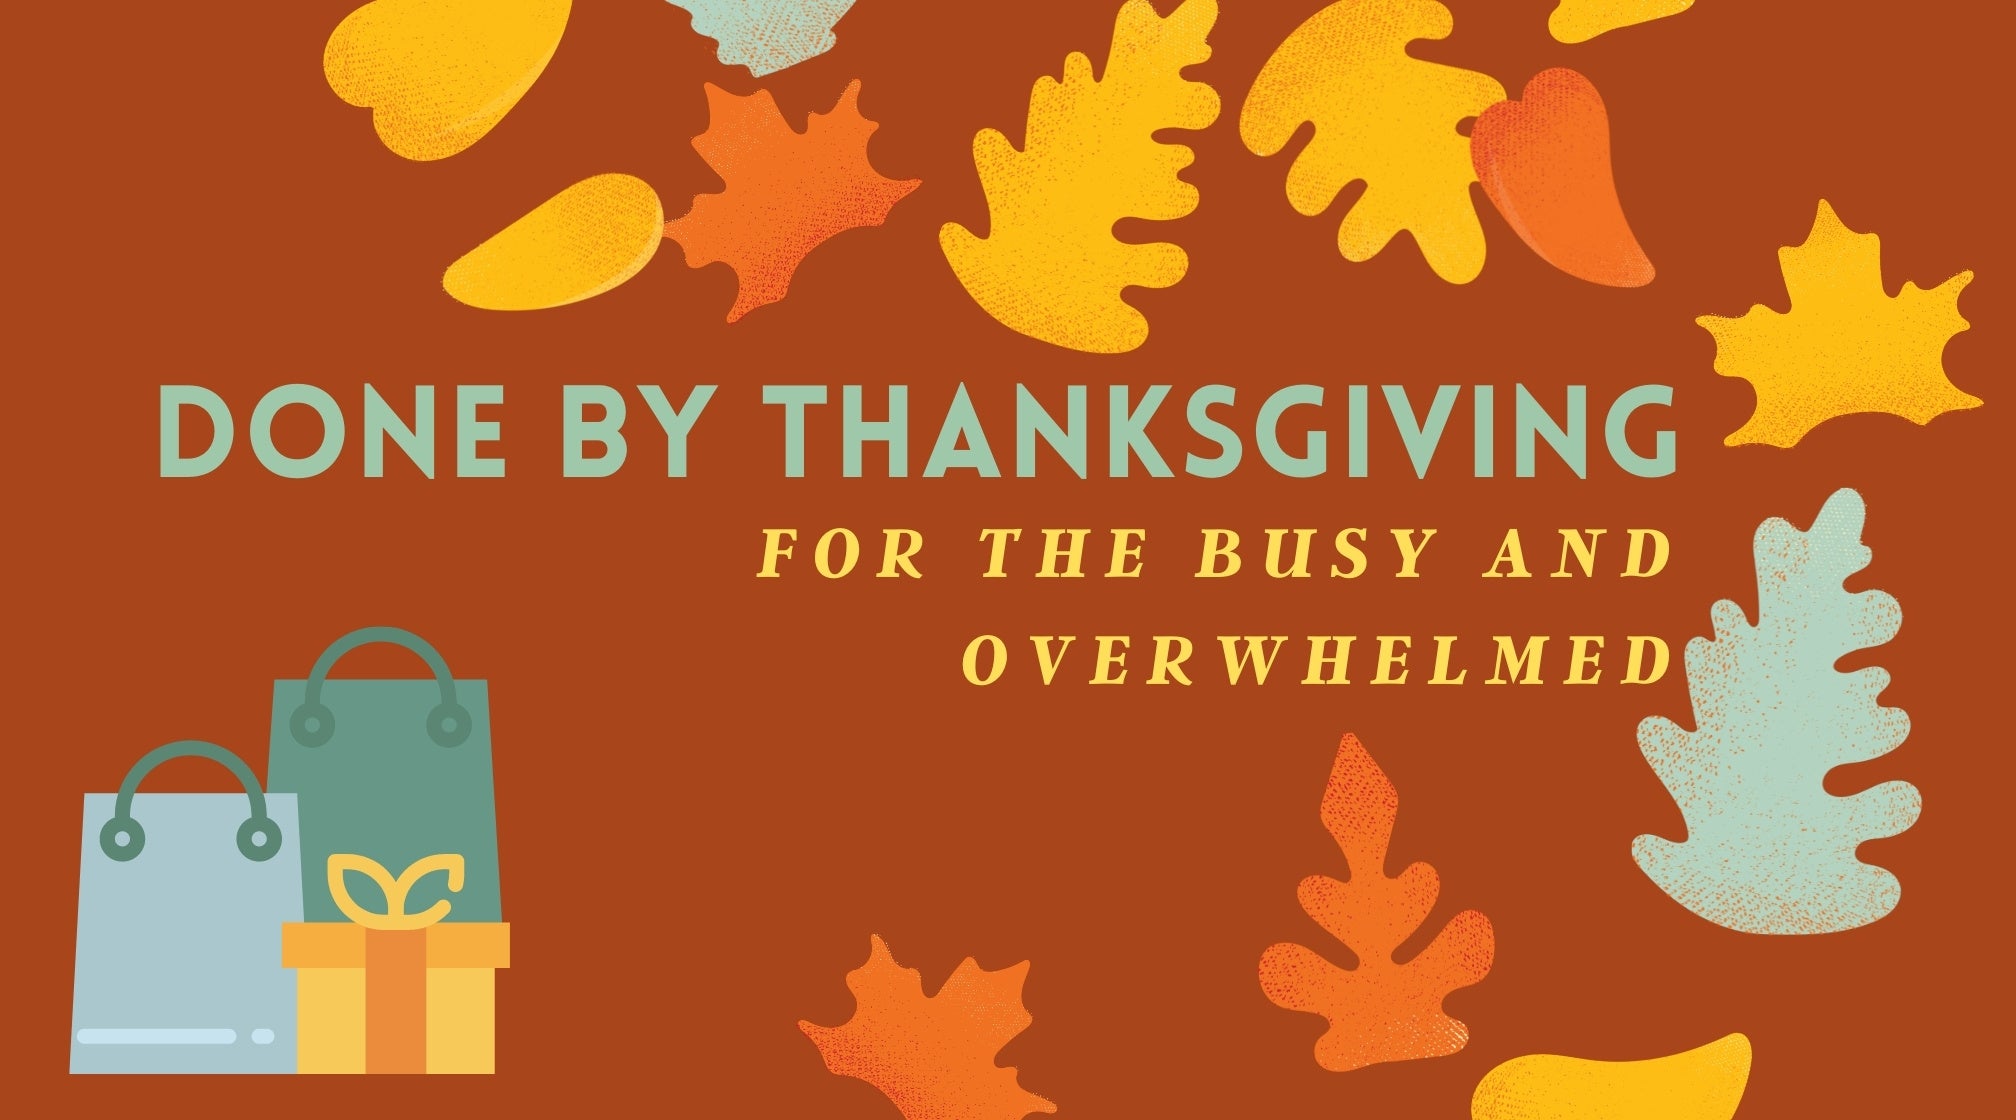 How to Get Your Shopping Done by Thanksgiving